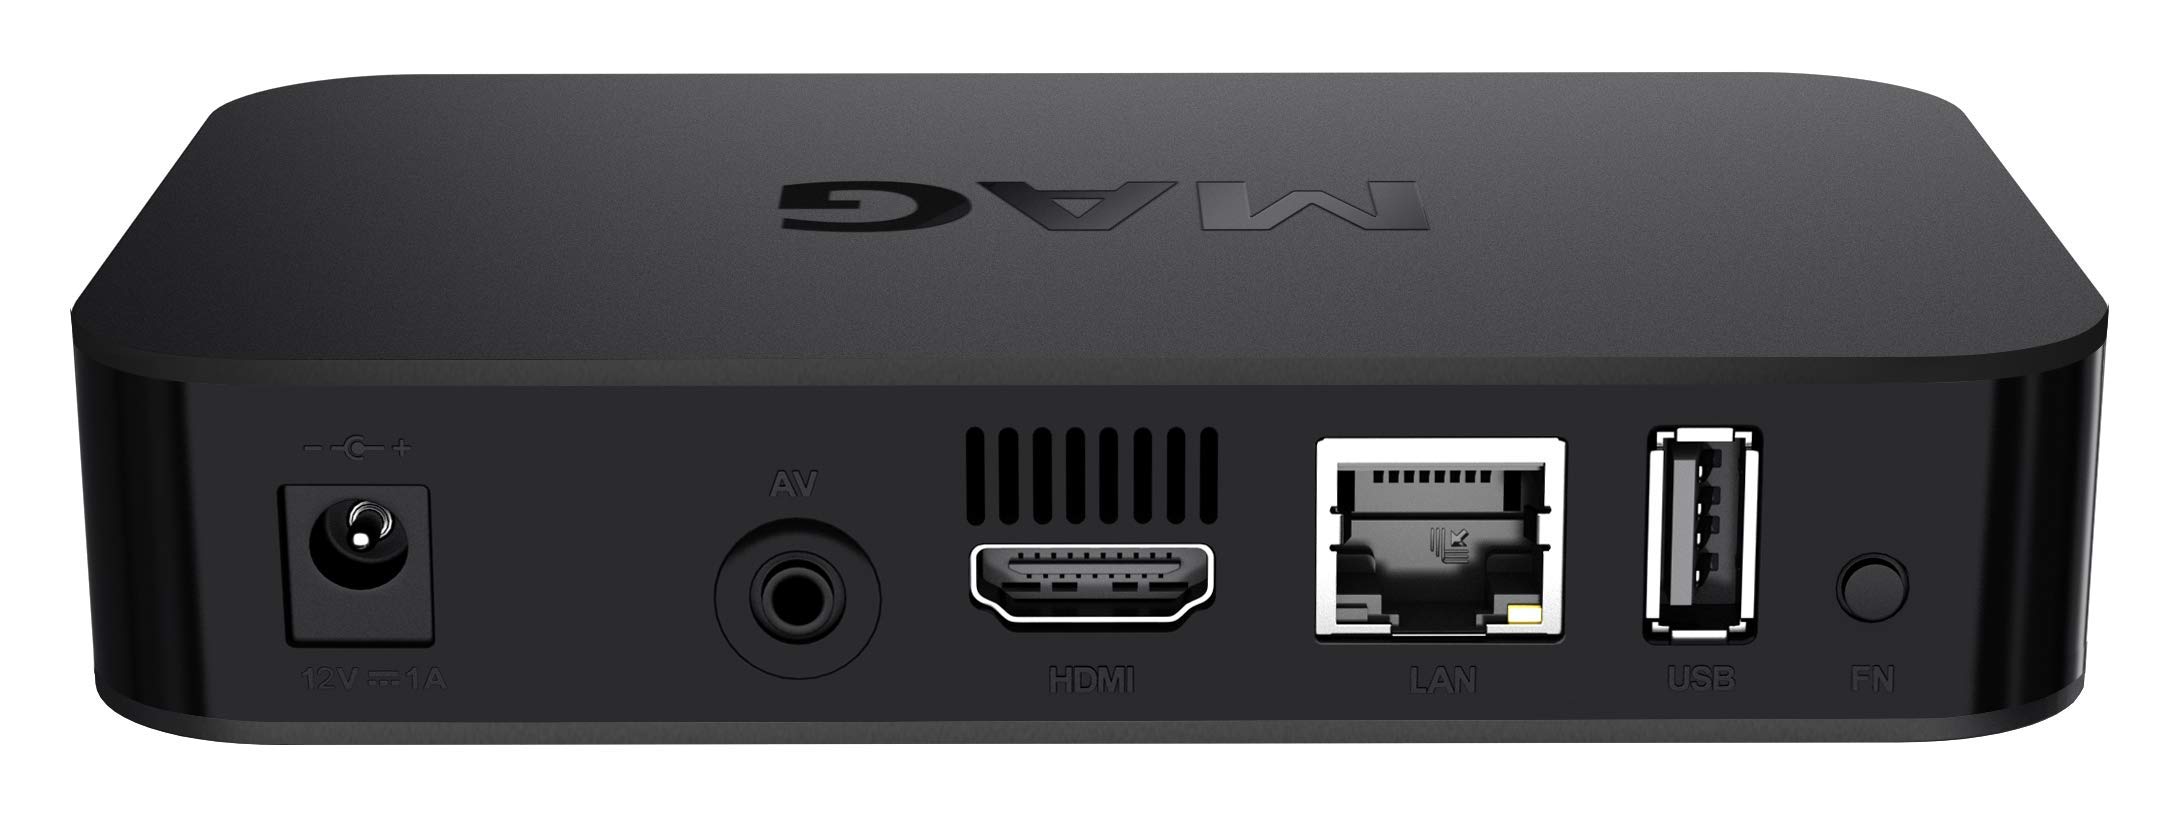 MAG 420w1 4K and HEVC Support, 512 MB RAM, 512 MB NAND, USB × 2 pcs. (3.0, 2.0), Built-in Wi-Fi, Linux OS, HDMI and RCA outputs